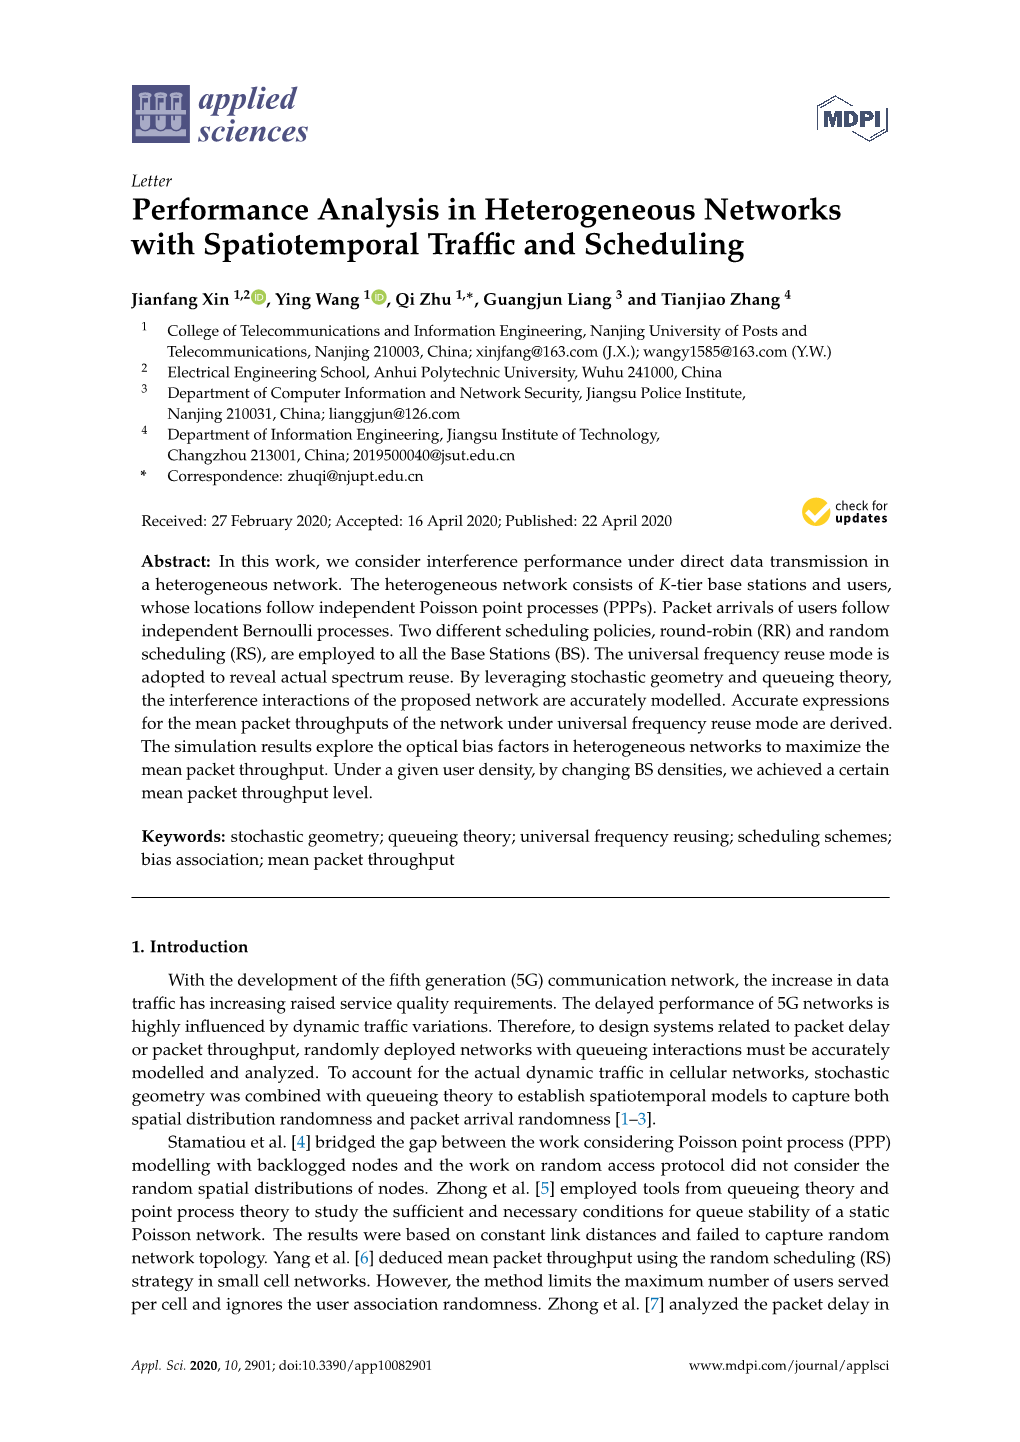 Performance Analysis in Heterogeneous Networks with Spatiotemporal Trafﬁc and Scheduling